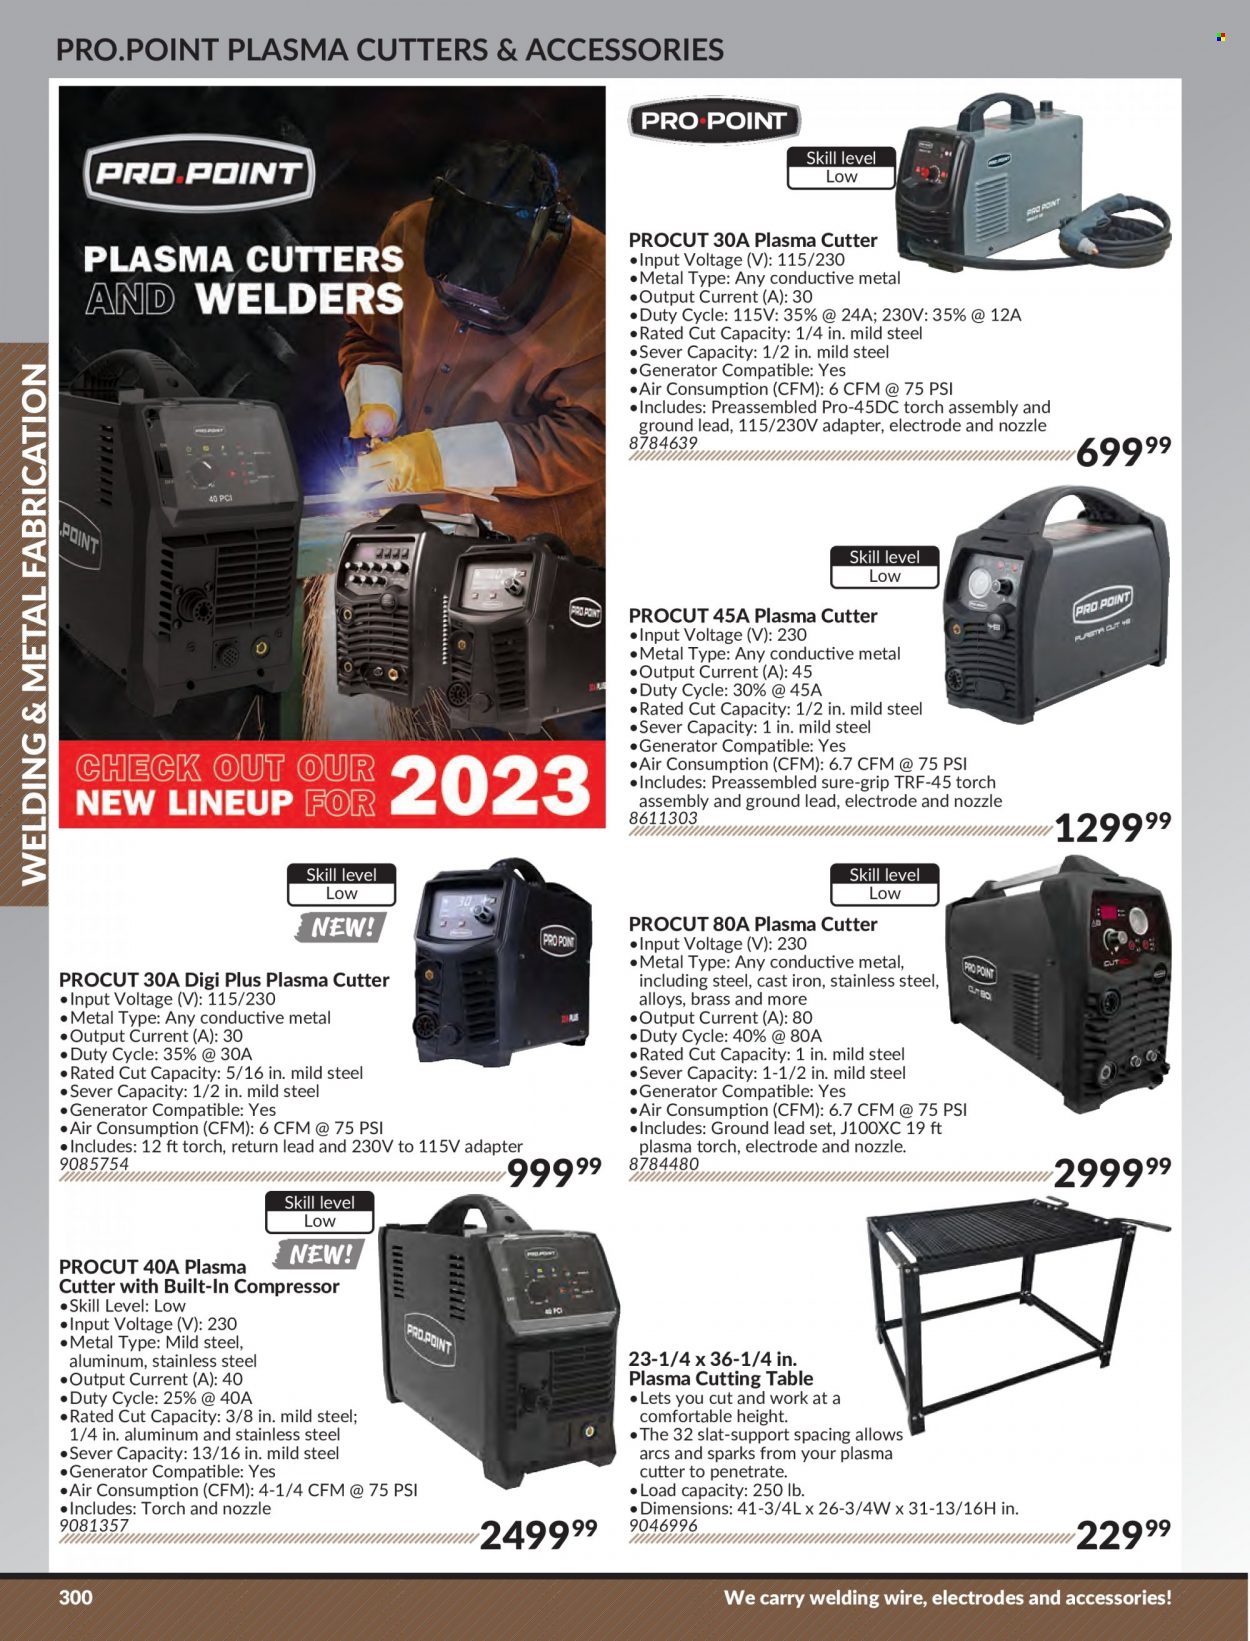 thumbnail - Princess Auto Flyer - Sales products - plasma cutter, air compressor, table, generator, compressor. Page 306.